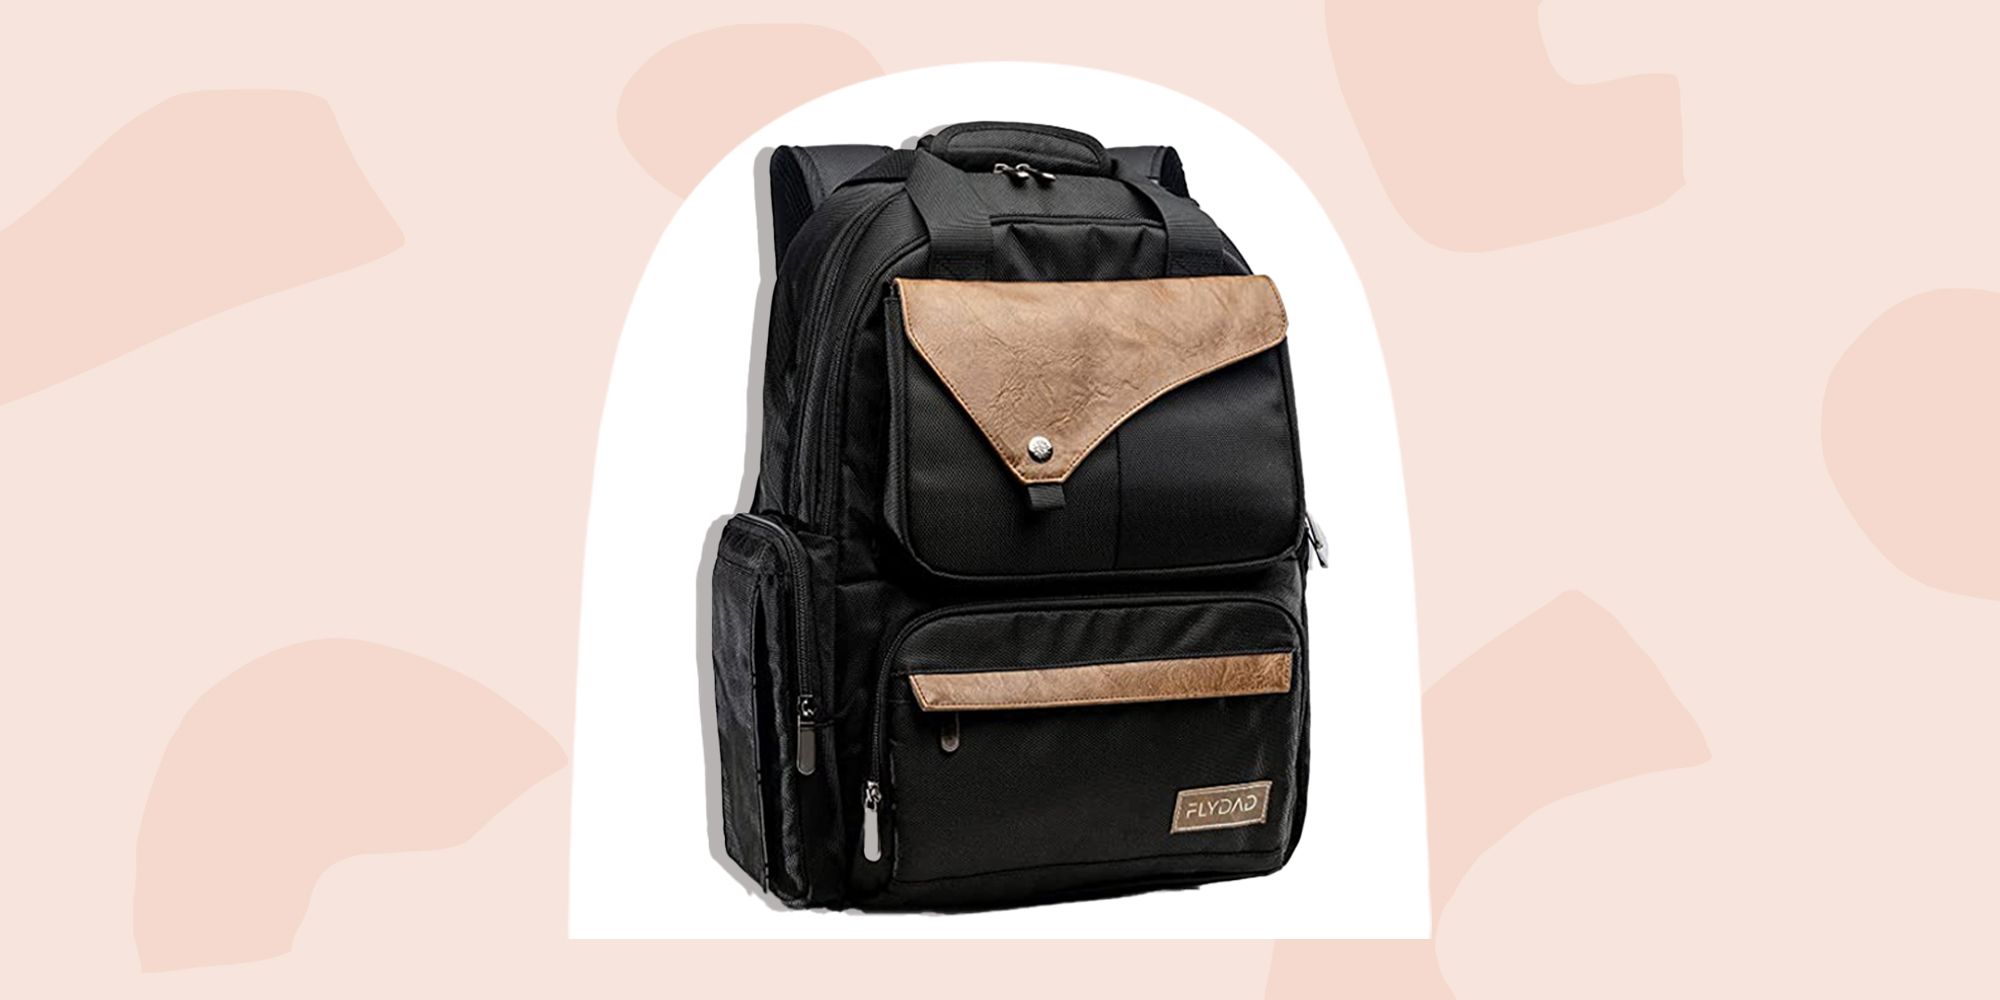 11 Best Diaper Bag Backpacks For the Stylish Parent